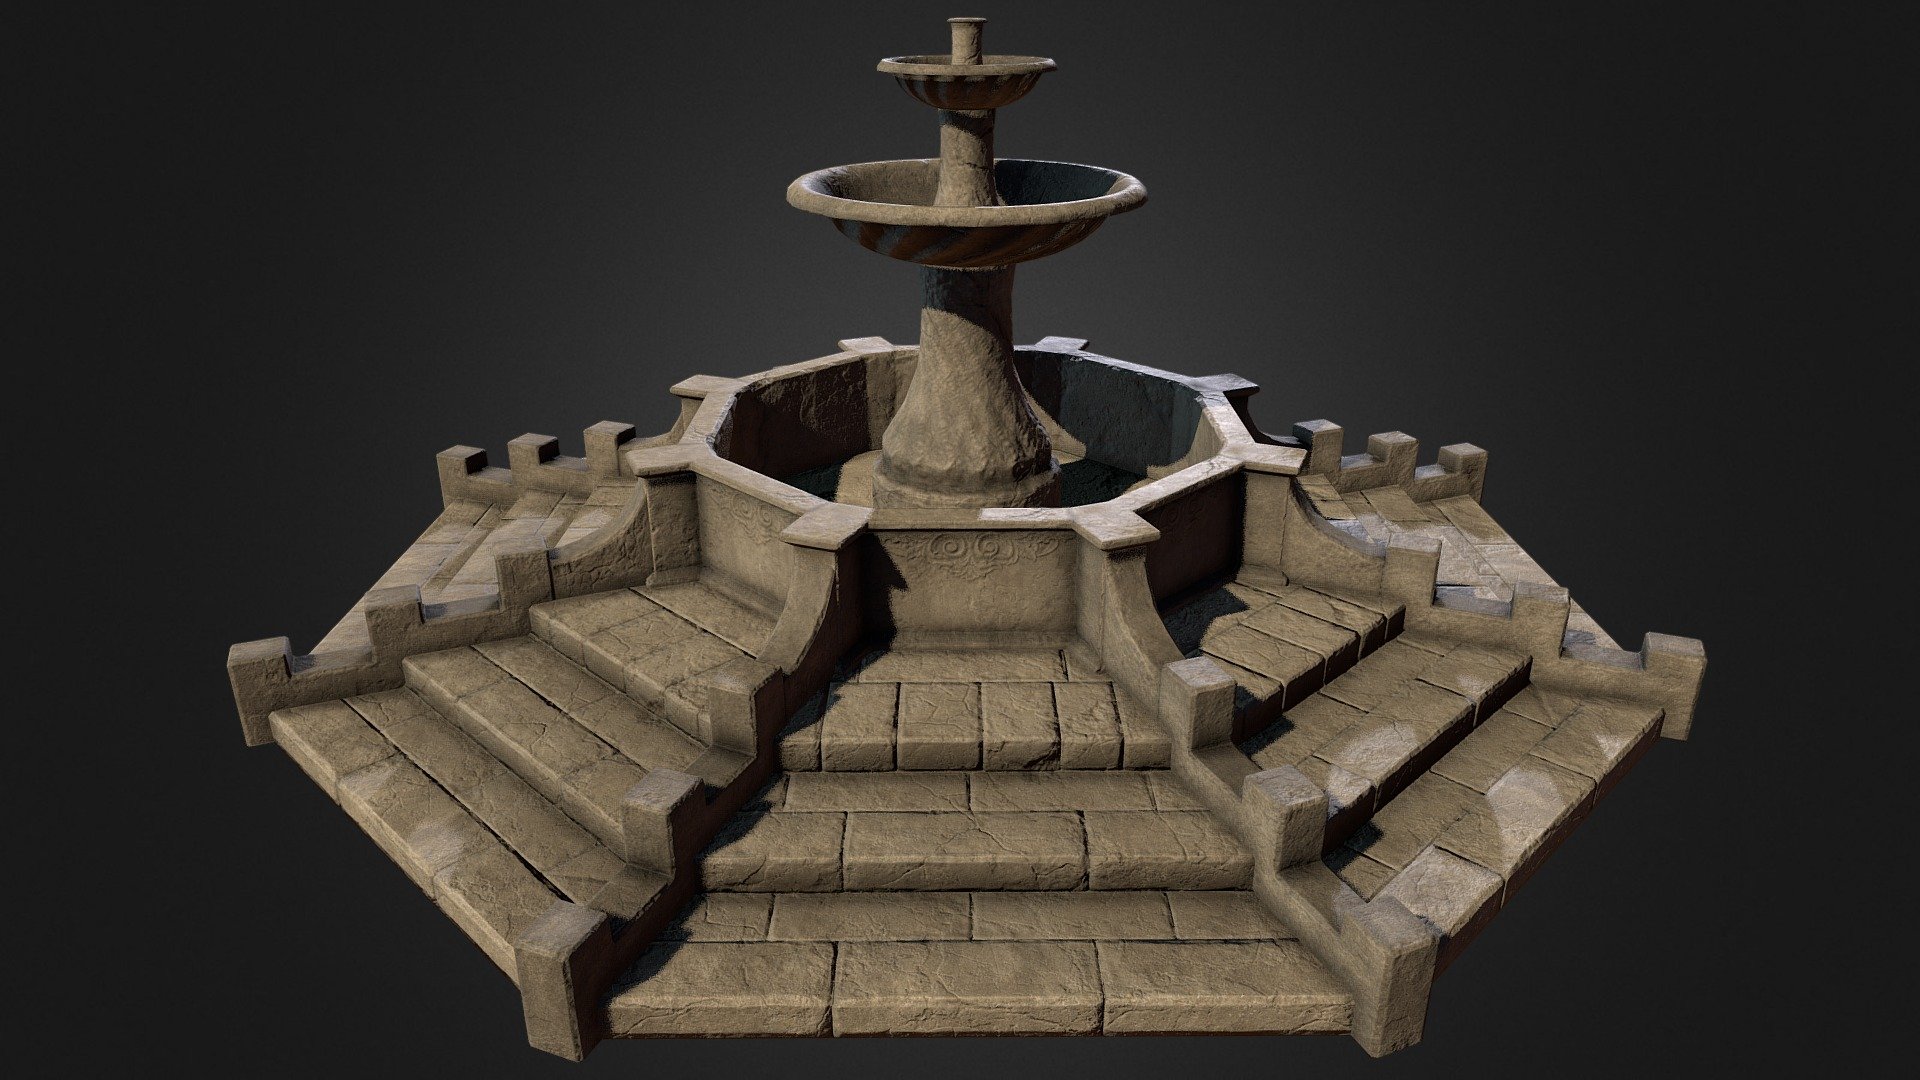 Artstation

Overview: Stone Water Fountain with two variants (one with Water mesh planes, one without). 

Geometry: Package includes the Base Mesh, two LOD’s in both .fbx and .obj file formats. Also included is a .uasset file with LOD's, collision, and a generated lightmap.

3DS Max Dimensions – D26m x H10.8m approximate to real world scale 
Pivot is centred to the base of the model and is set at X:0 Y:0 Z:0

Base Mesh – 4,566 Tris




LOD 1 – 3,543 Tris

LOD 2 – 3,069 Tris

Base Mesh Without Water – 4,526 Tris




LOD 1 – 3,503 Tris

LOD 2 – 3,069 Tris

Textures: Uses two sets of PBR Textures at 2048x2048 for the fountain and 1024x1024 for the water in PNG format with both Metalness and Specular workflow.

If you have any questions, please feel free to contact me 3d model